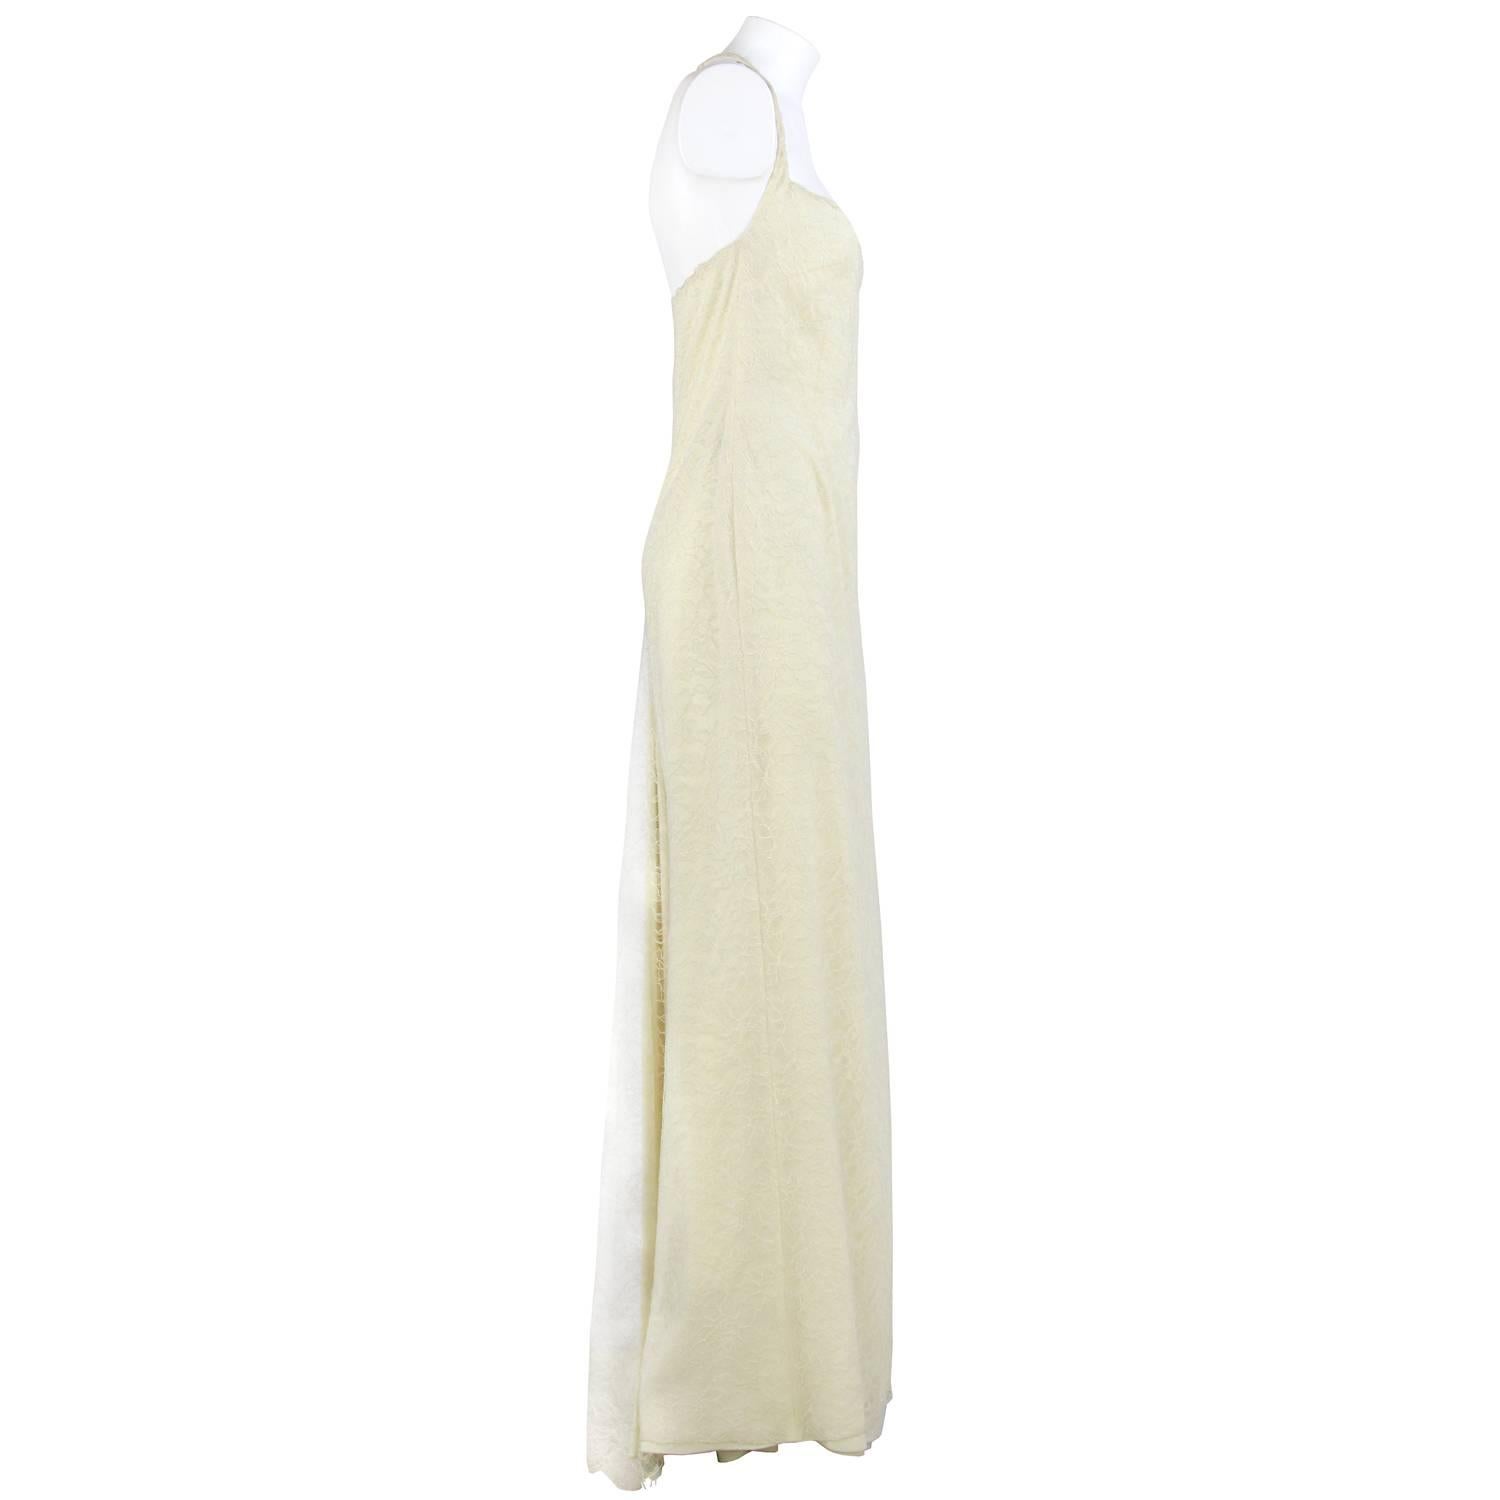 Romantic Armani silk wedding dress in ivory color with lace in a floral motif. Thin straps fastened behind the neck with a small plastic pression button, backless. Lateral zip closure. The item was produced in the 2000s and is vintage, is in good